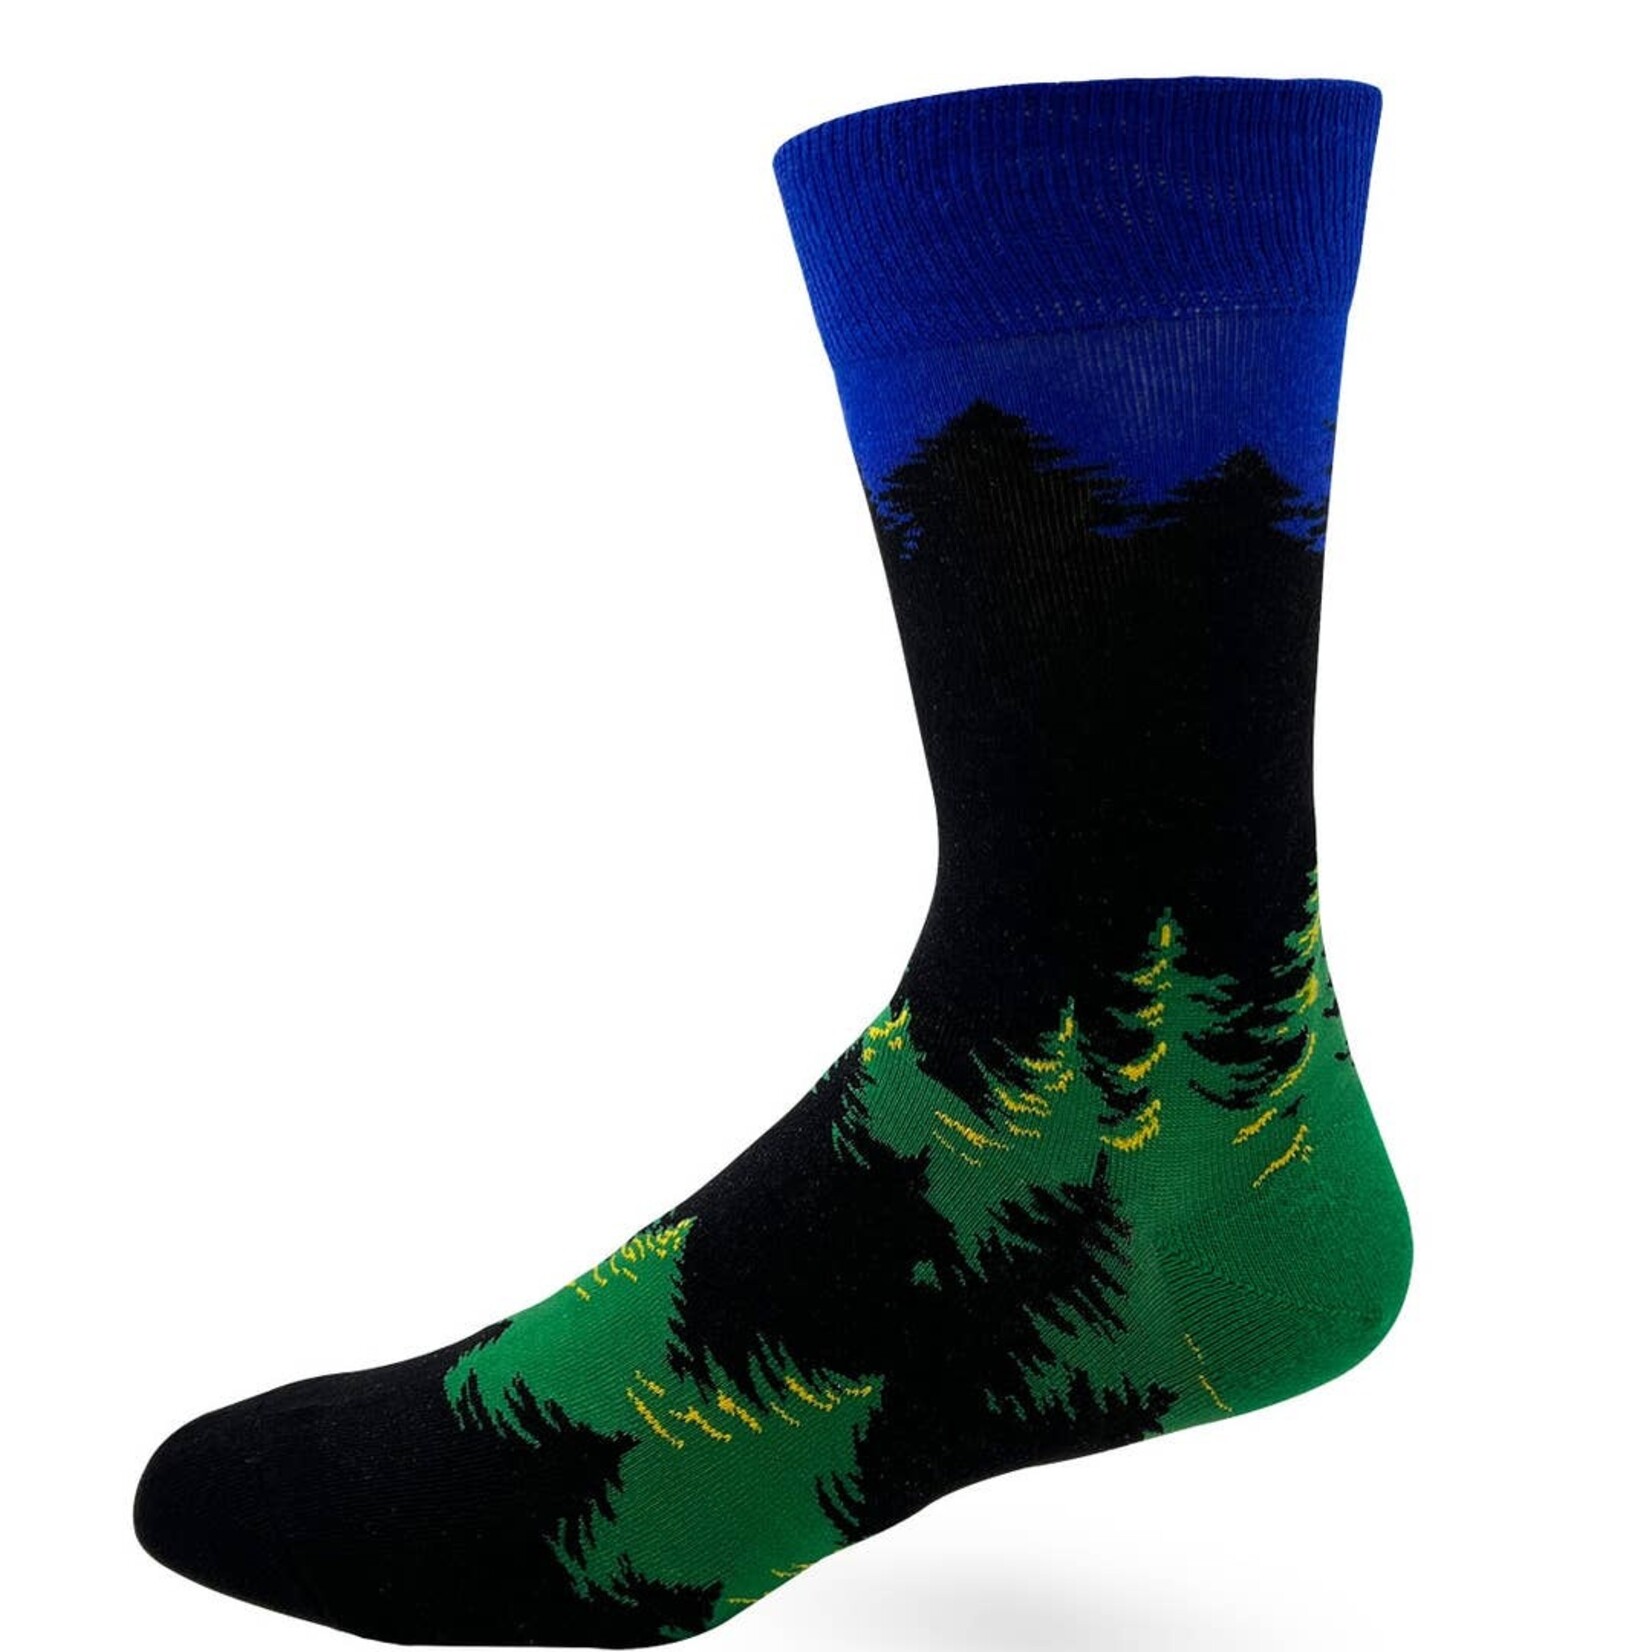 Fabdaz Fabdaz May the Forest Be with You Men's Novelty Crew Socks